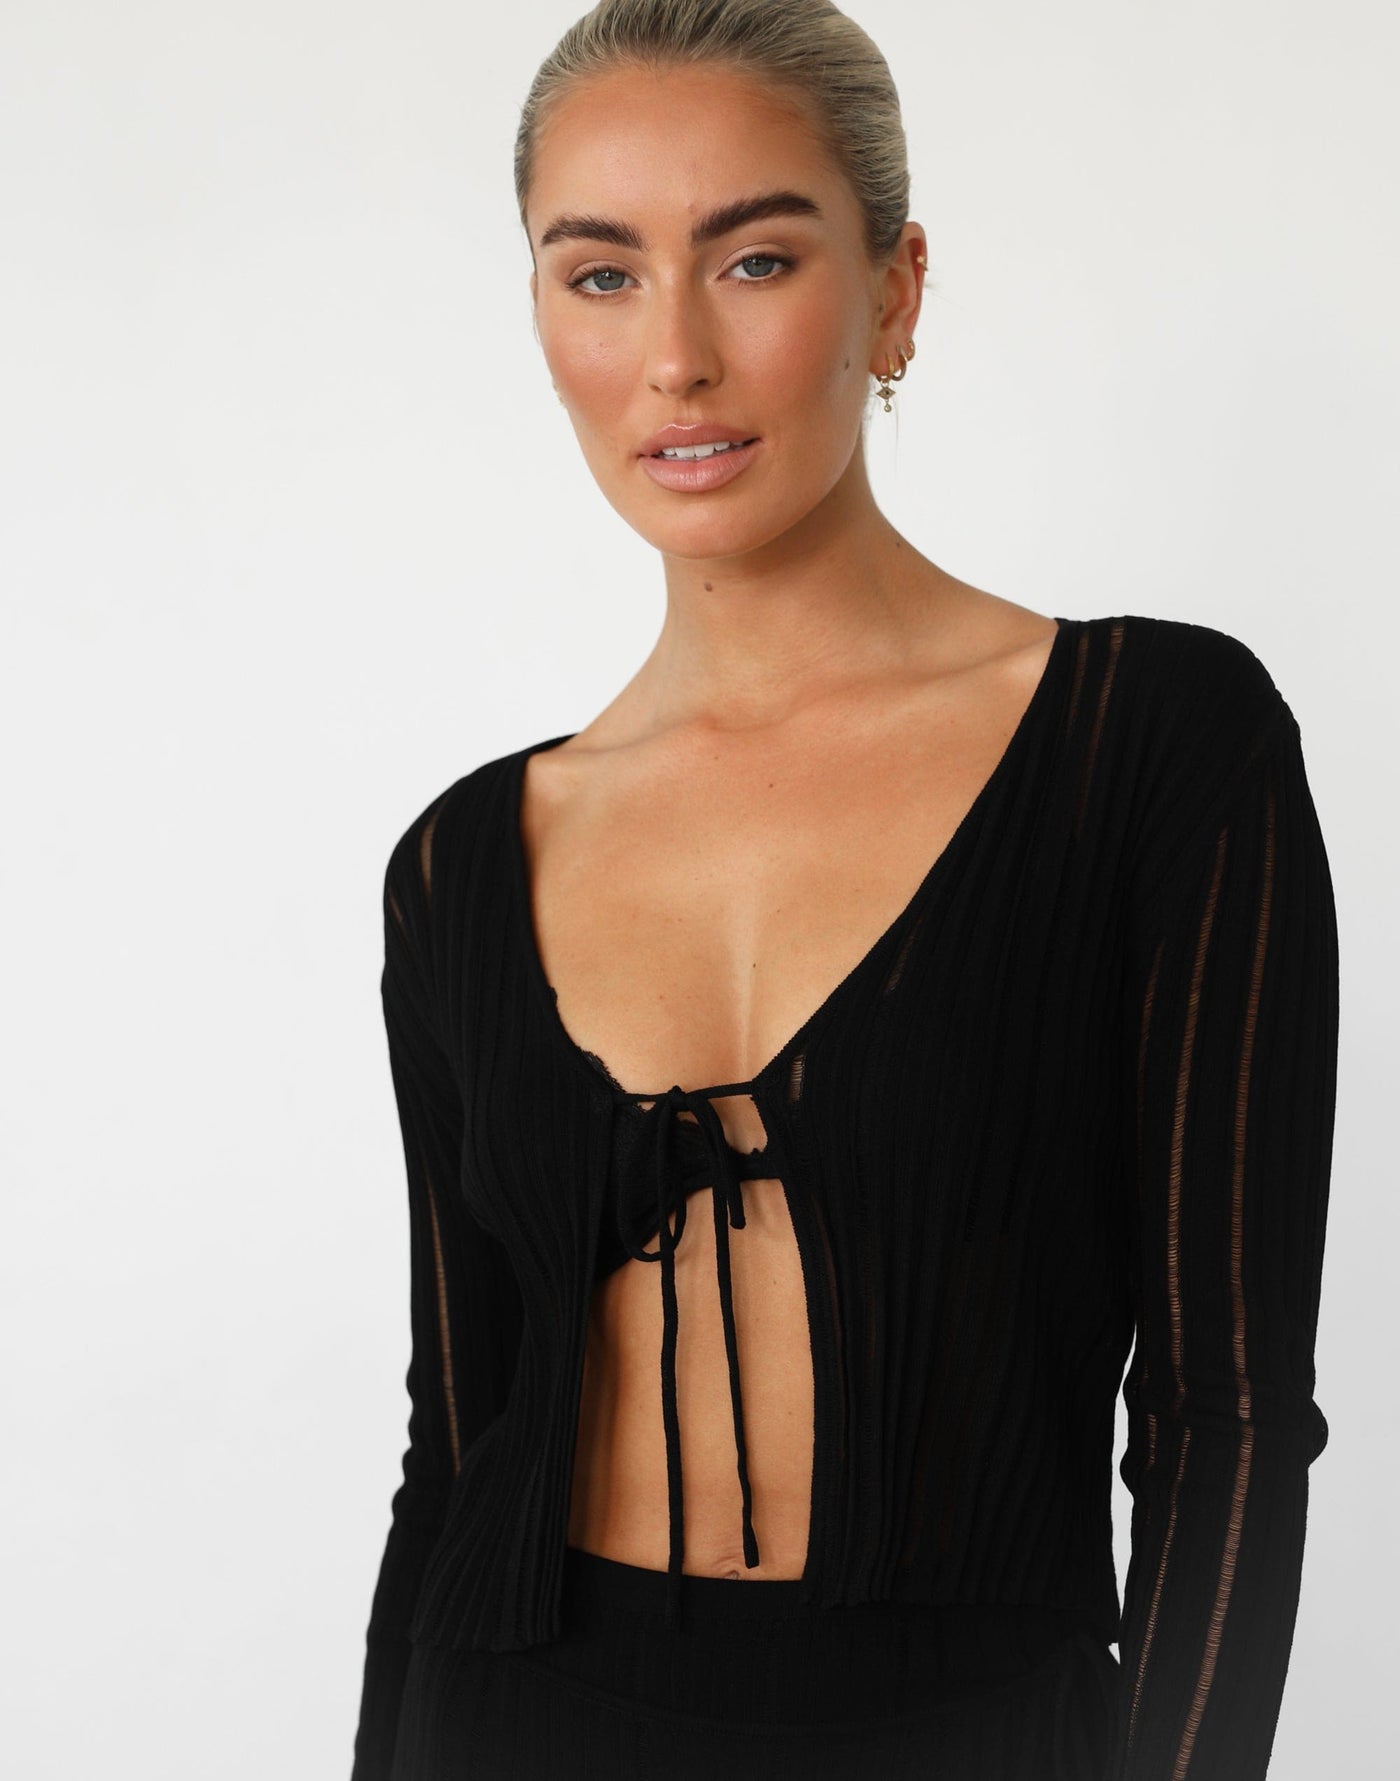 Krystelle Long Sleeve Top (Black) - Distressed Knit Tie Open Front Top - Women's Top - Charcoal Clothing